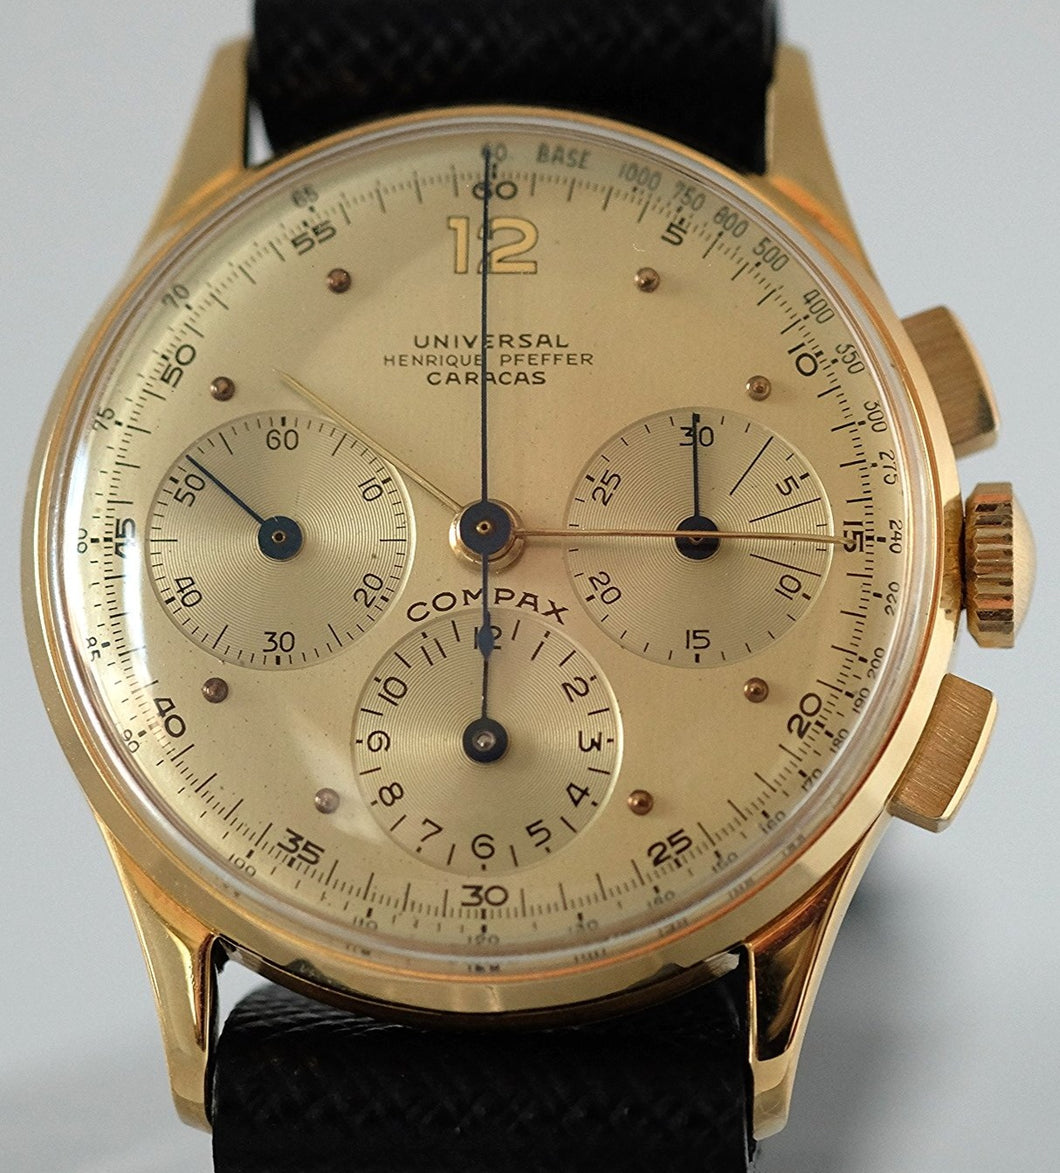 Universal Genève Compax from Henrique Pfeffer Caracas in Yellow Gold